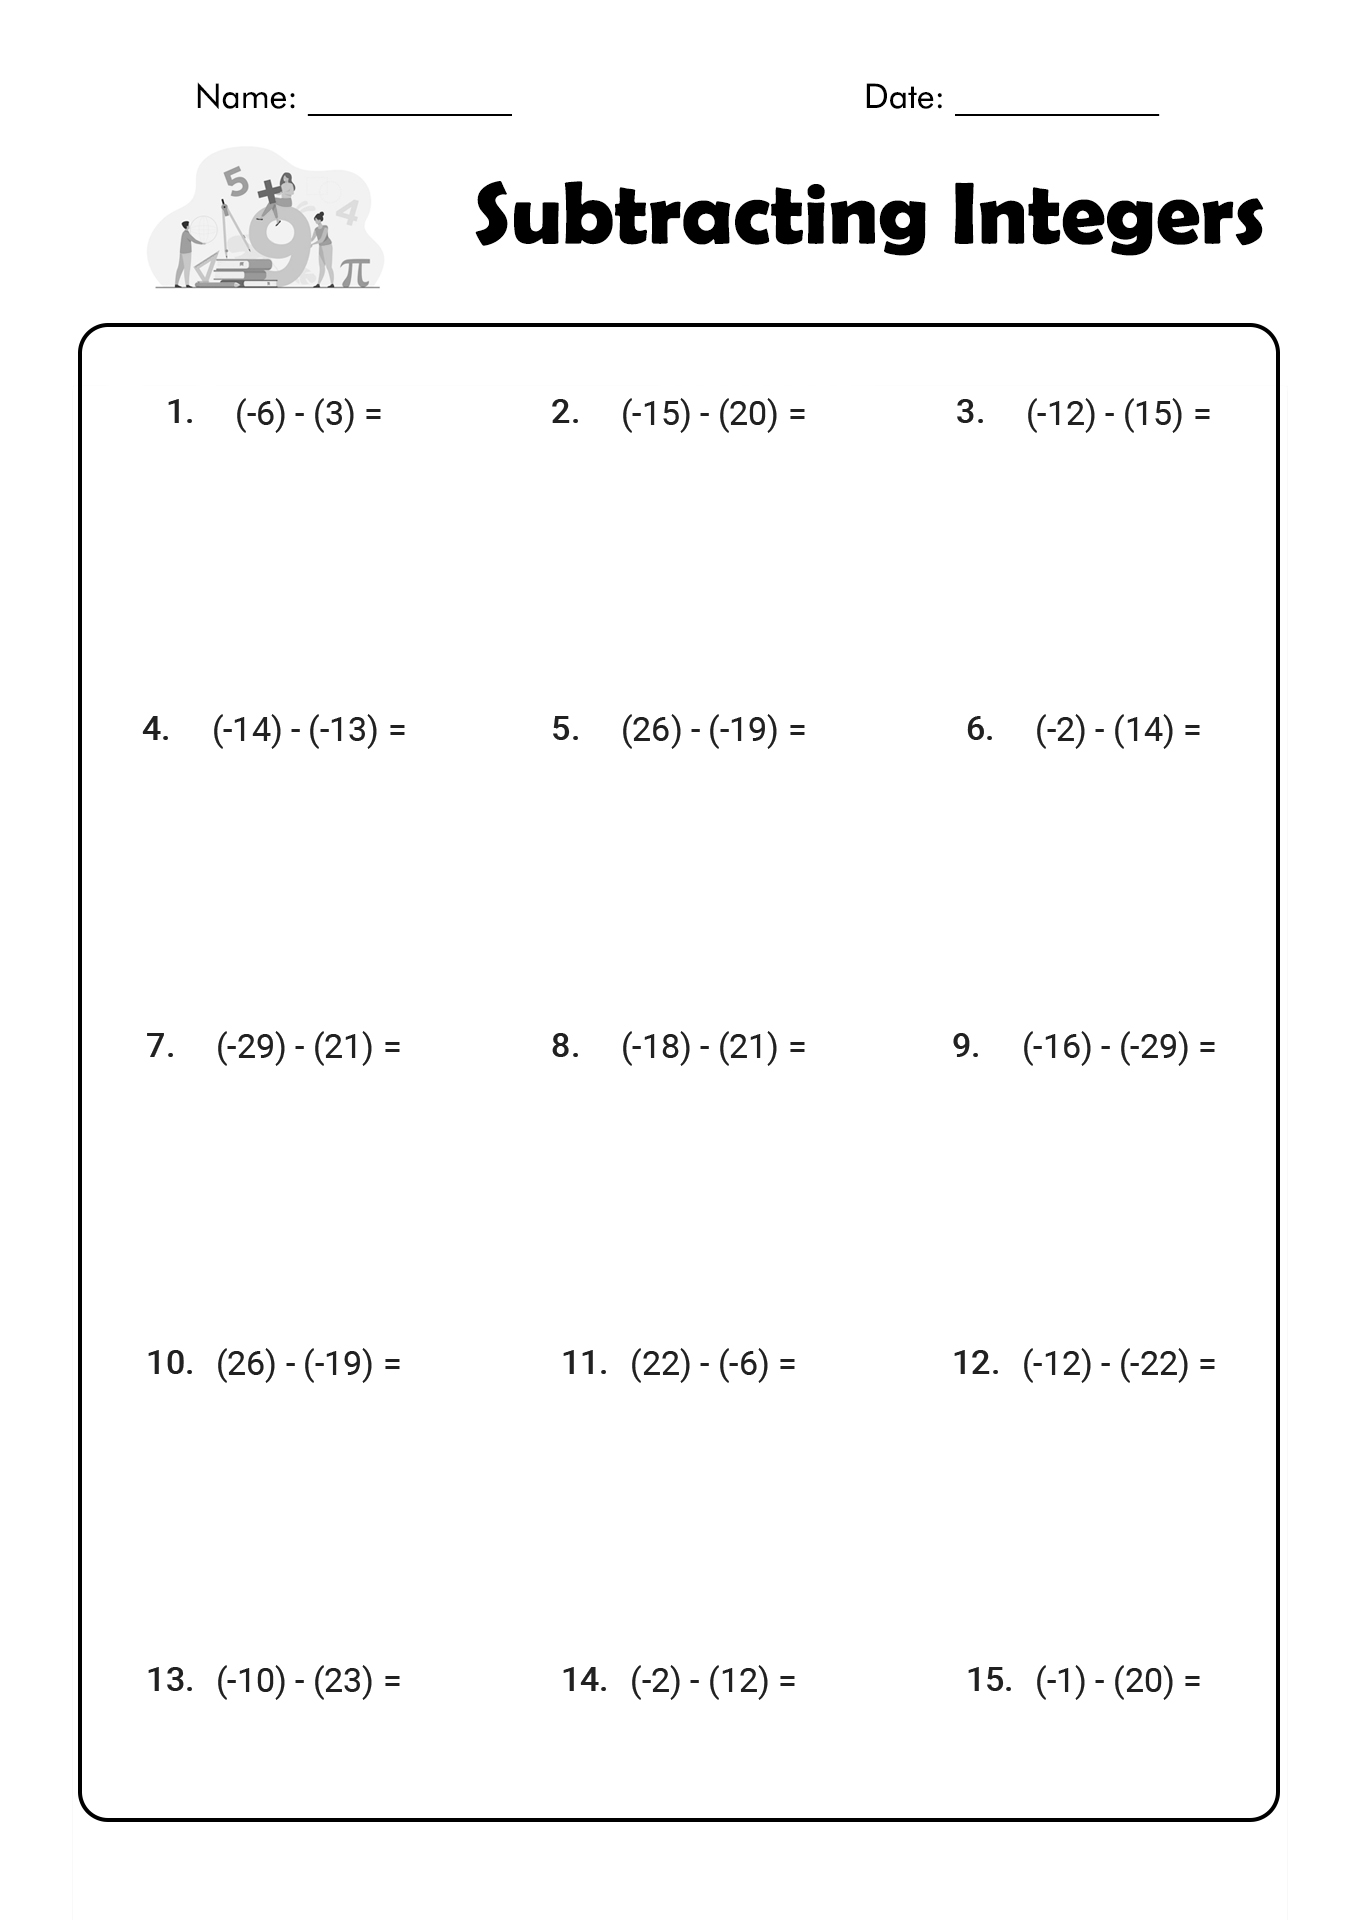 12-multiplying-integers-worksheets-with-answers-free-pdf-at